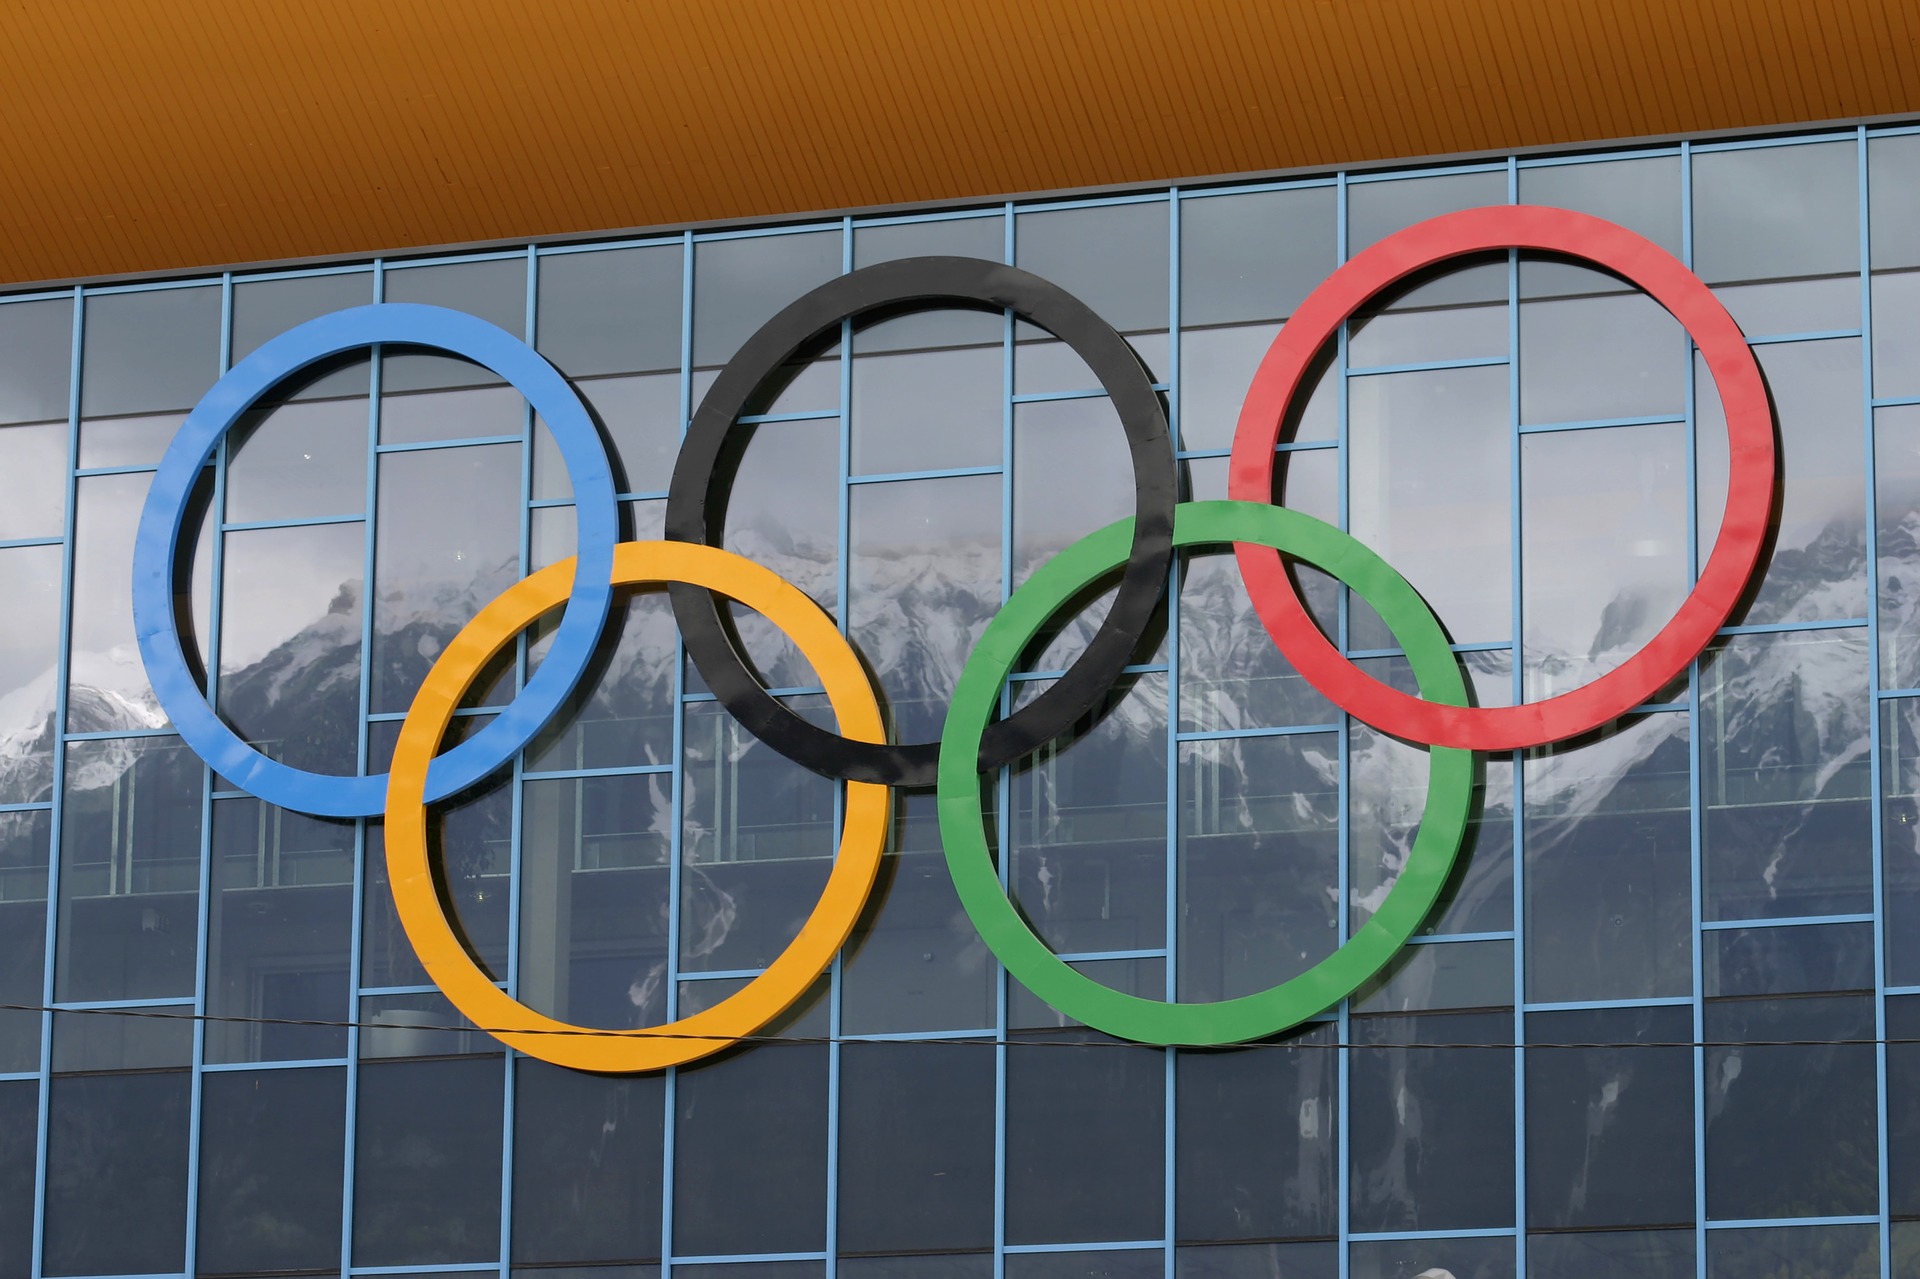 Why there are 5 rings in Olympics? | Fan Arch